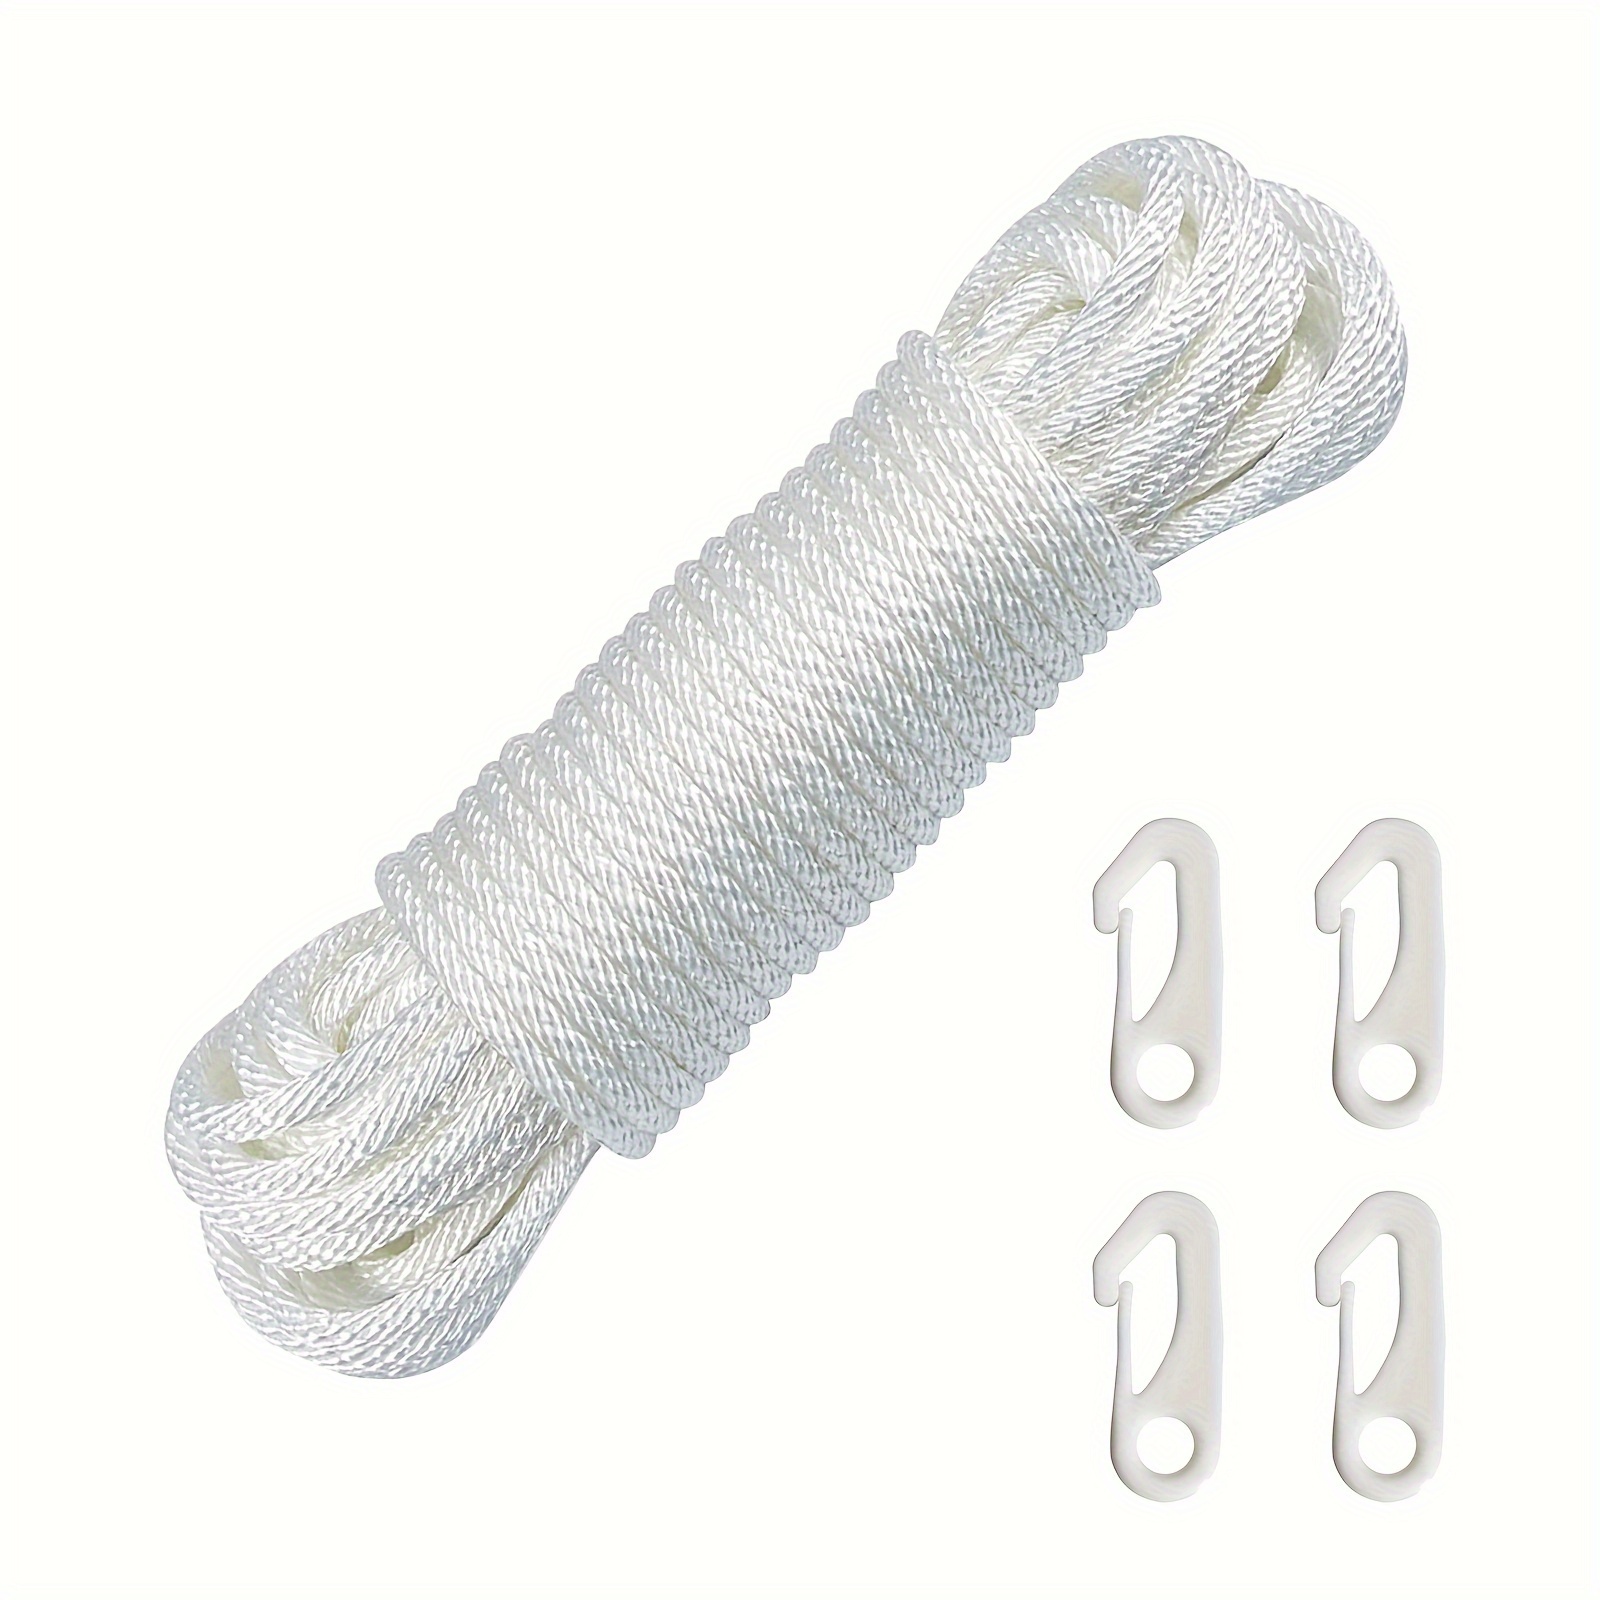  NQ Flag Pole Rope Kit - 100 Feet x 1/4 Diameter Flag Pole  Halyard Nylon Rope with 4 Pieces Flag Pole Hook Clips - Outdoor Flagpole  Accessories, Rope for Clothesline, Swing